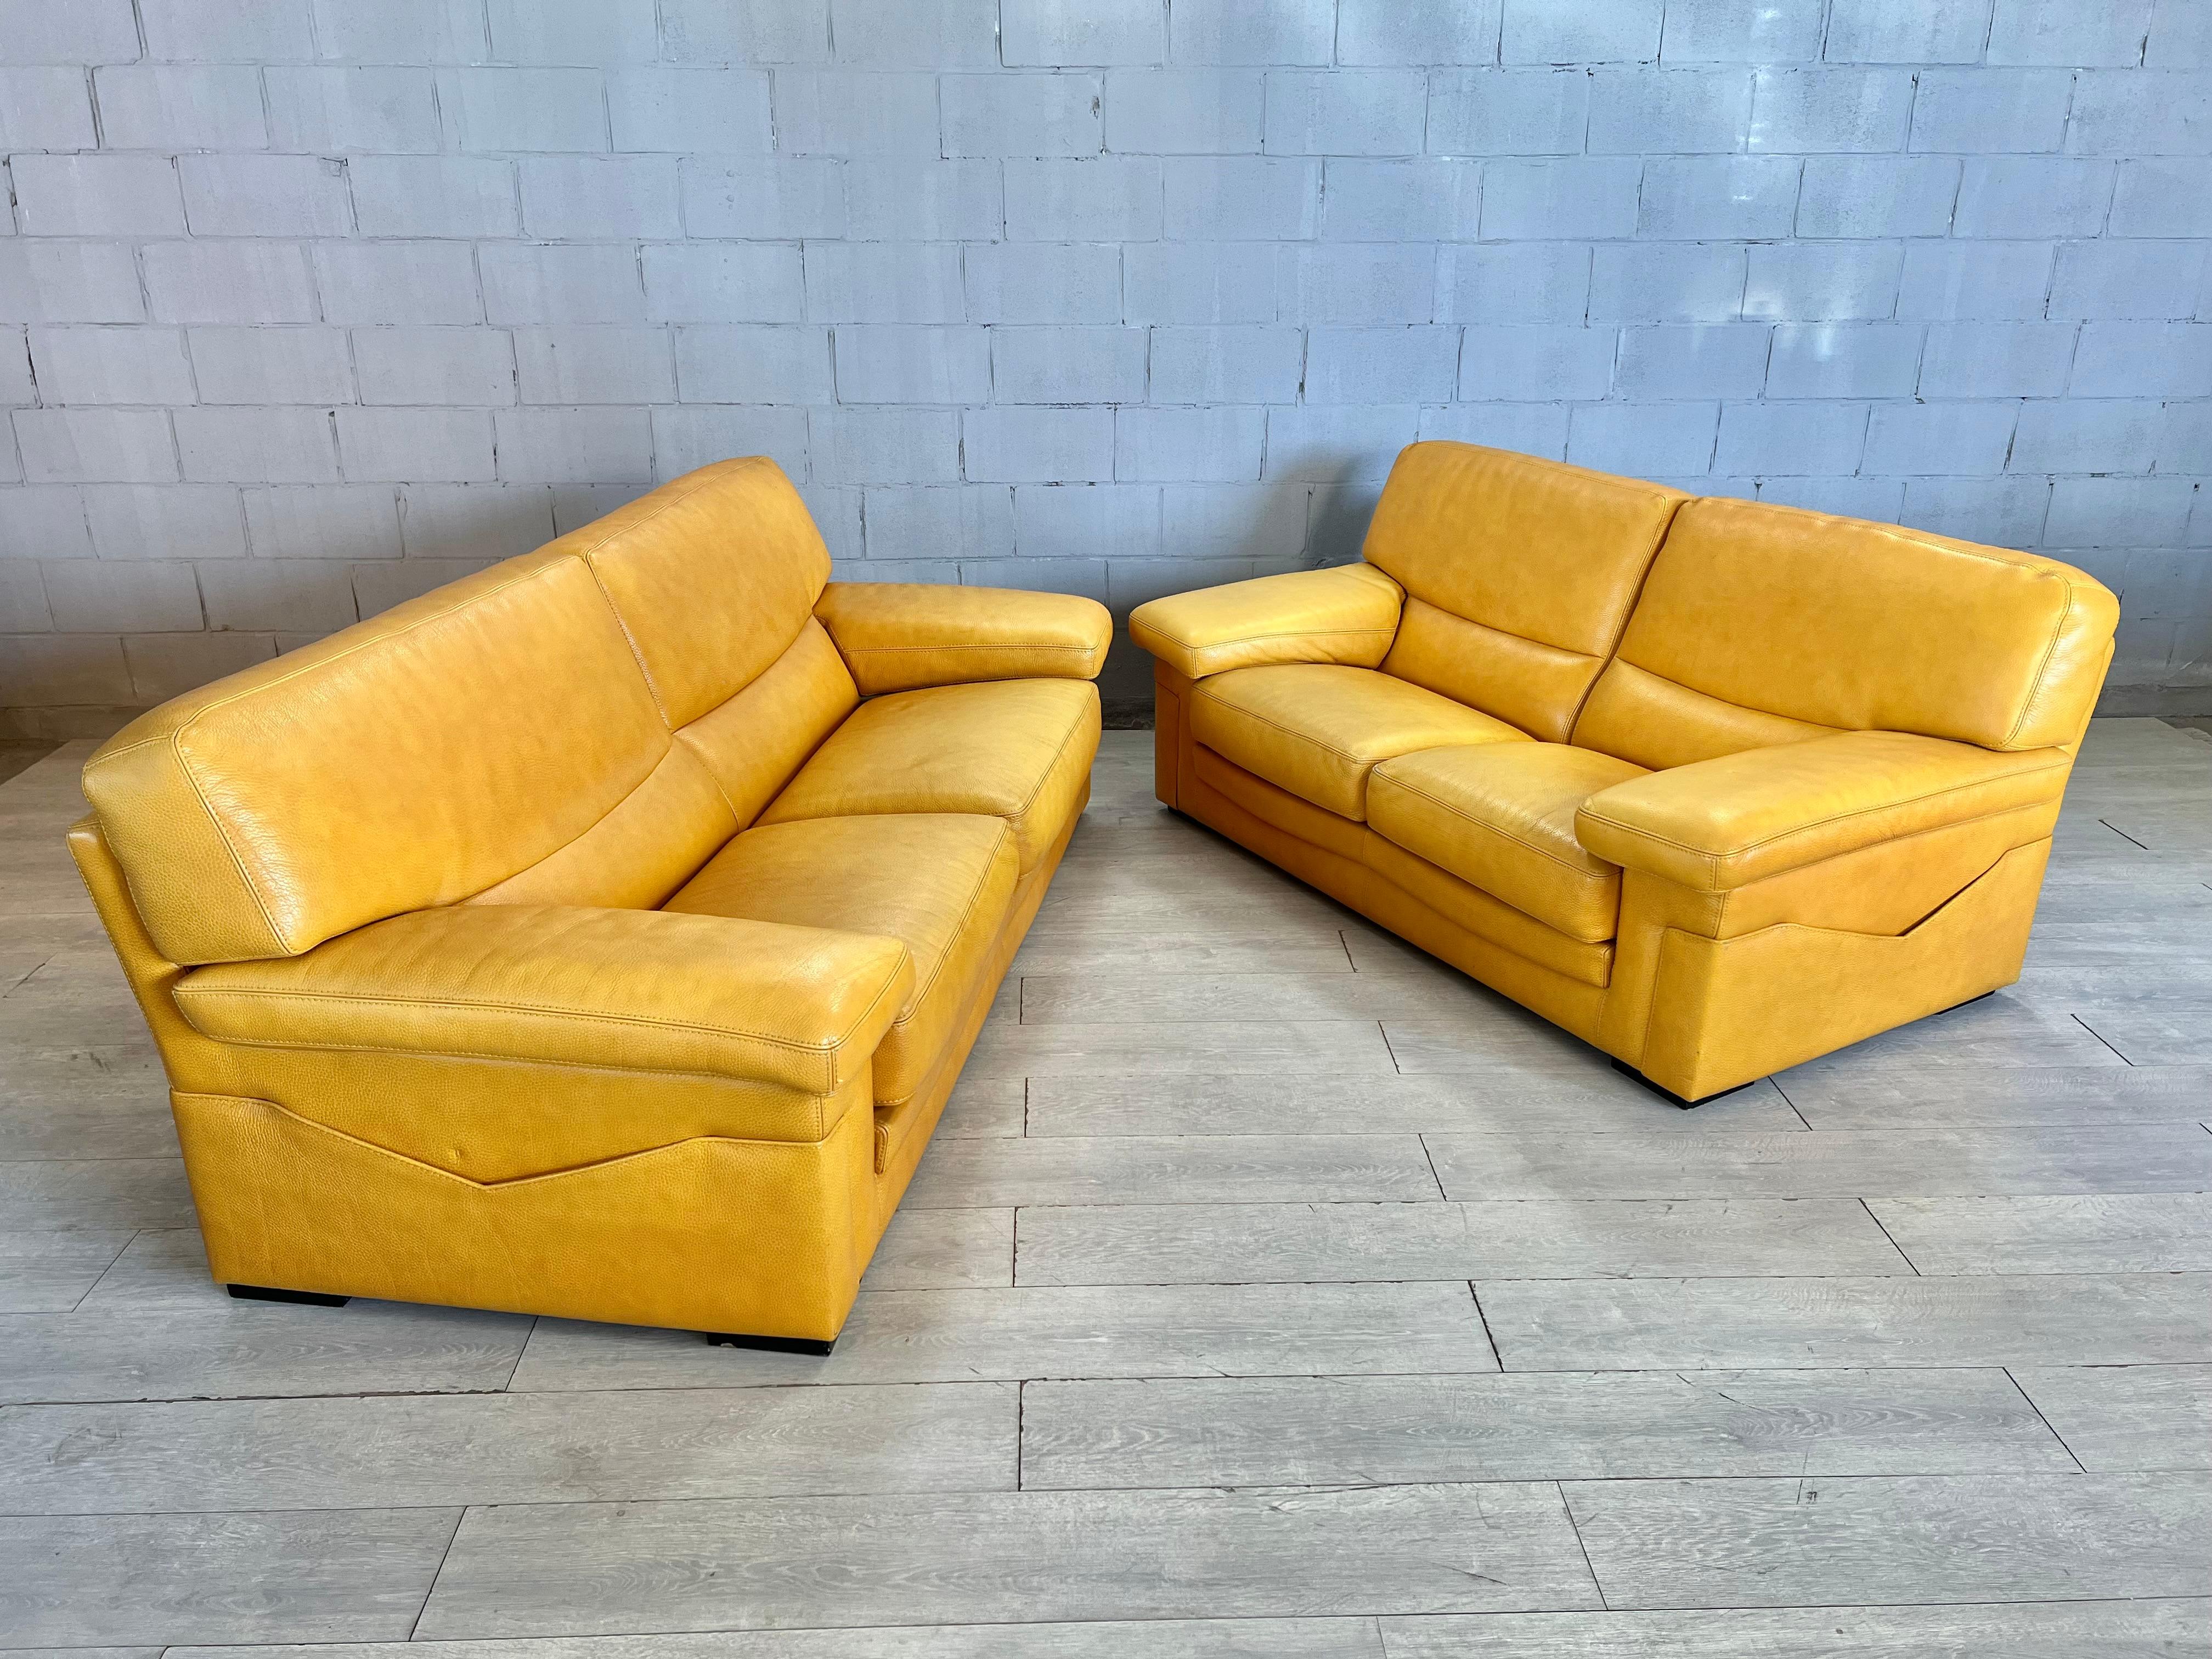 Original Vintage Modern Yellow Leather Sofa Lounger by Roche Bobois, Stamped 5